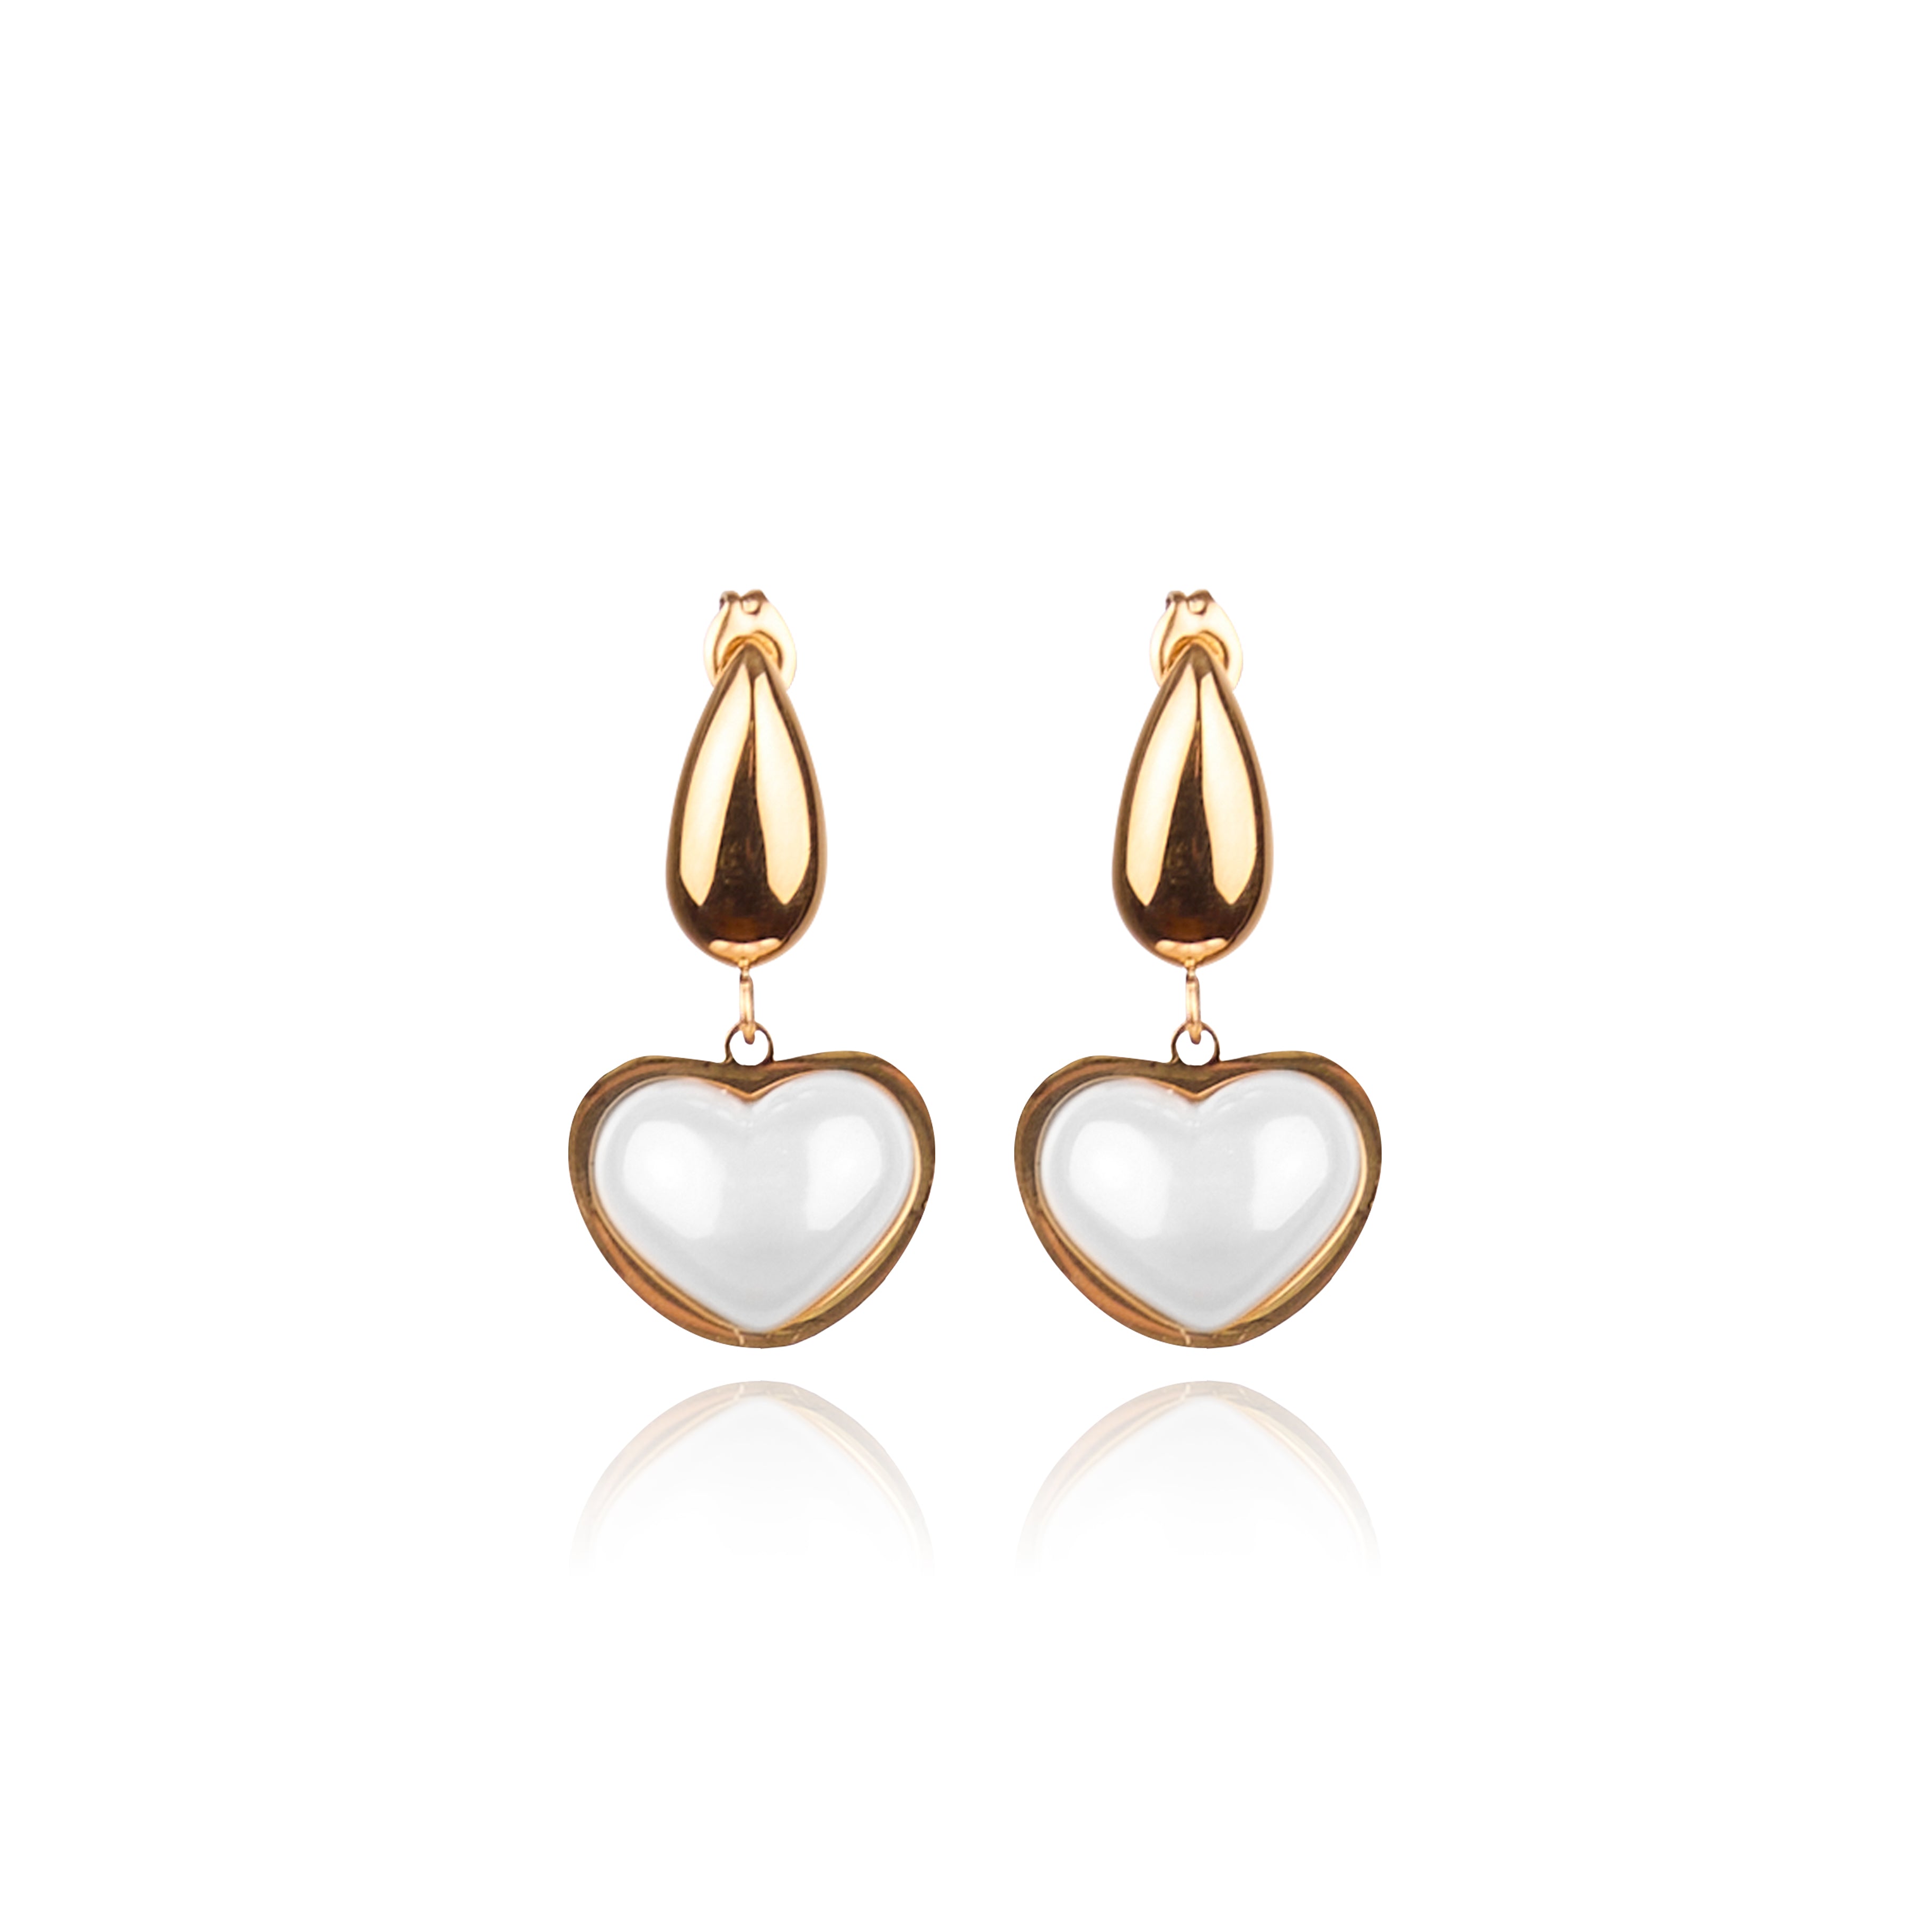 Perfect for adding a touch of romance to any outfit, they effortlessly elevate your look with elegance. Treat yourself or a loved one to these irresistibly pretty earrings and make every moment special.  18k gold plated on stainless steel. All the earrings come in a beautiful jewelry pouch.